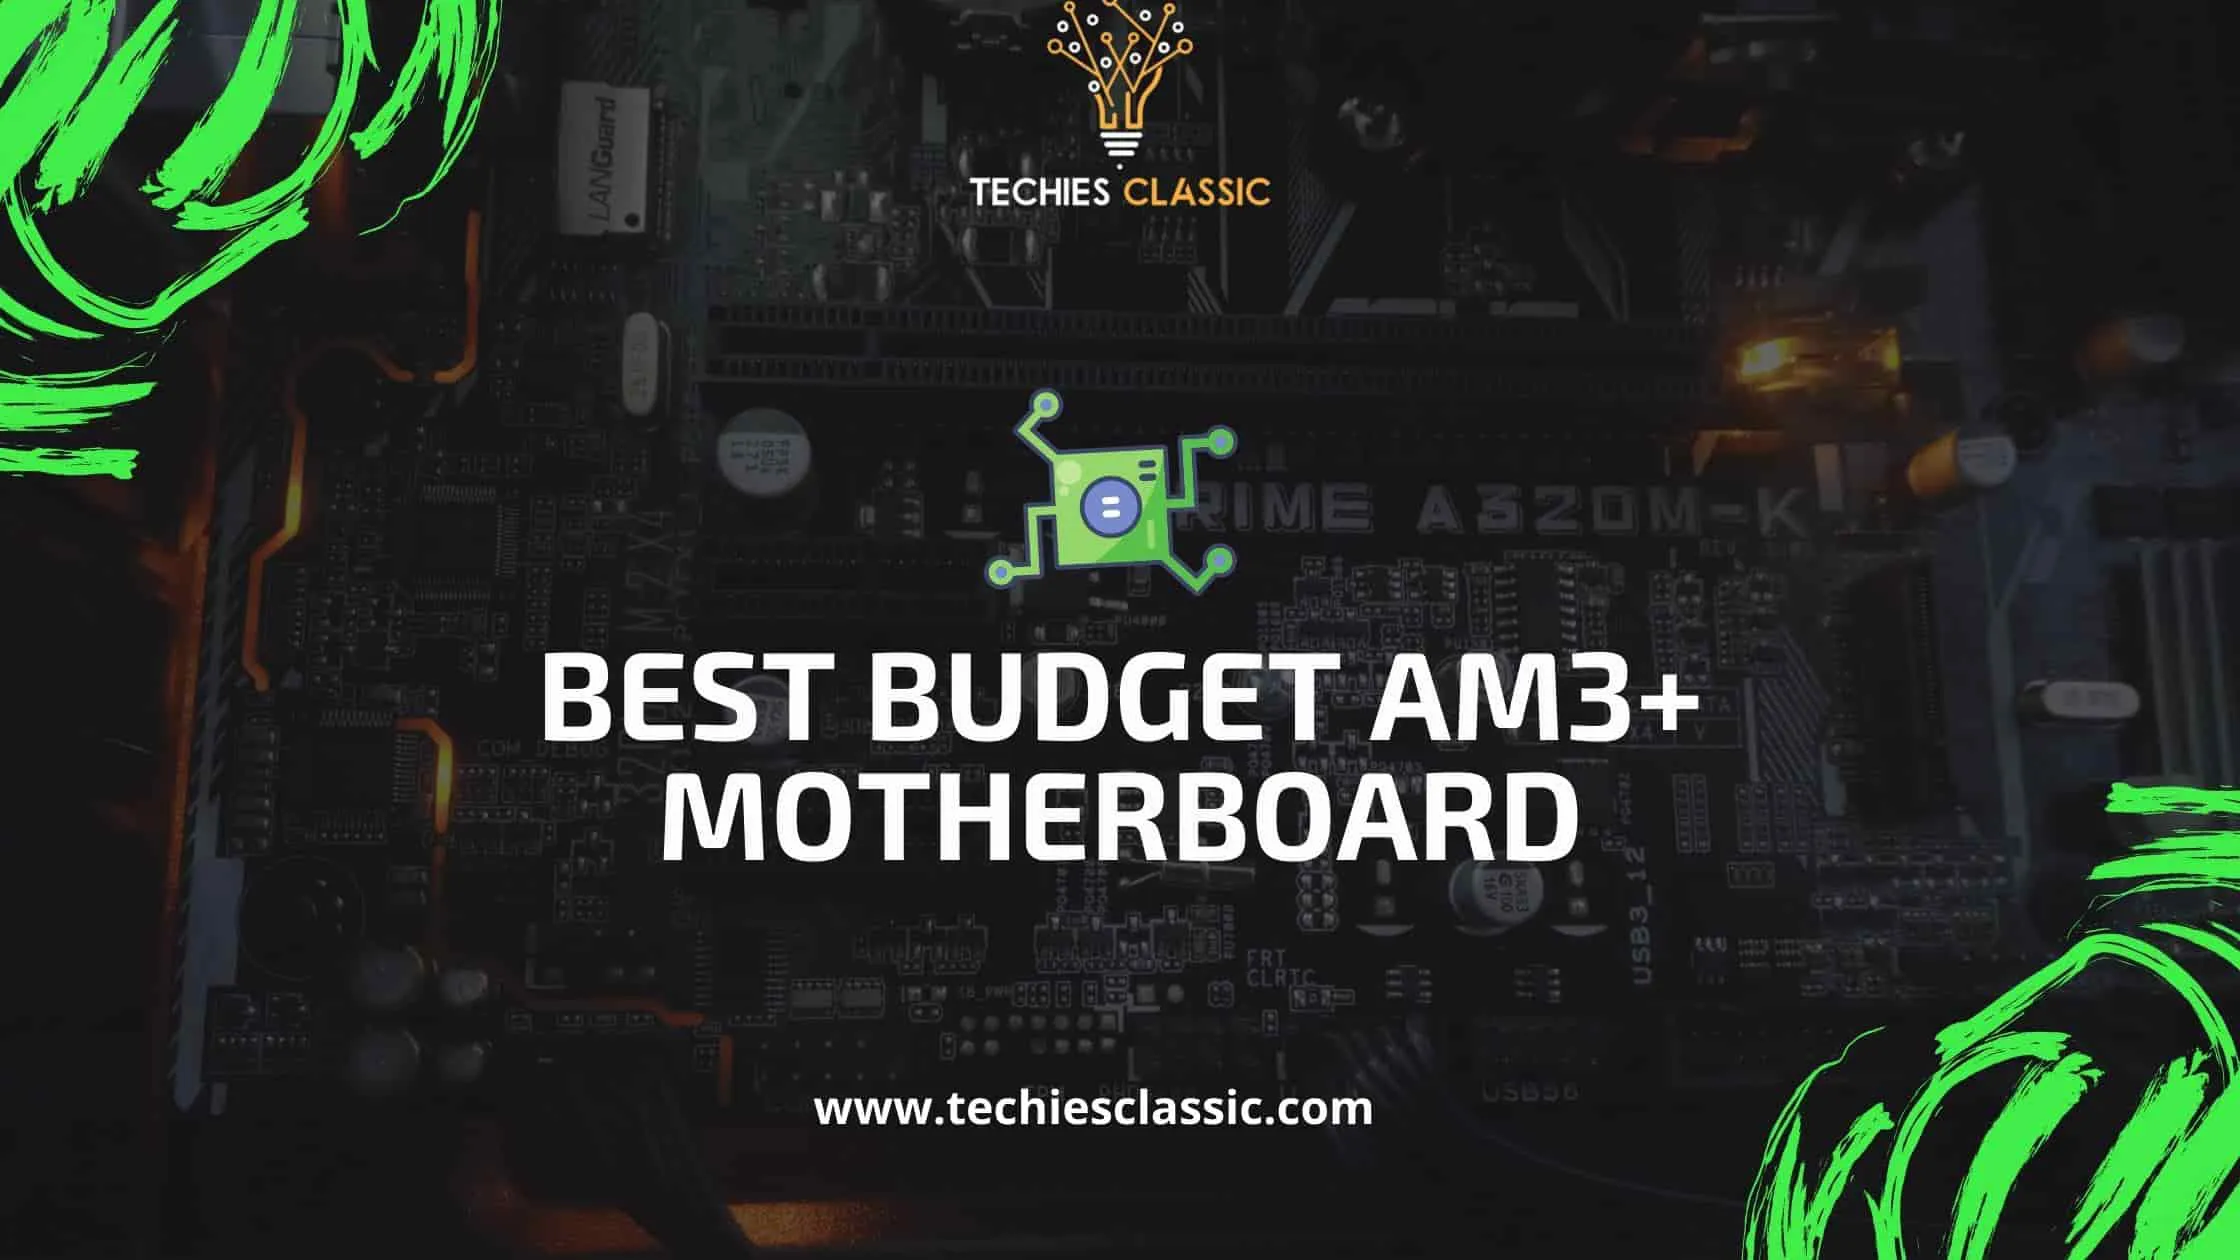 The 10 Best Budget AM3+ Motherboard You Should Get Now